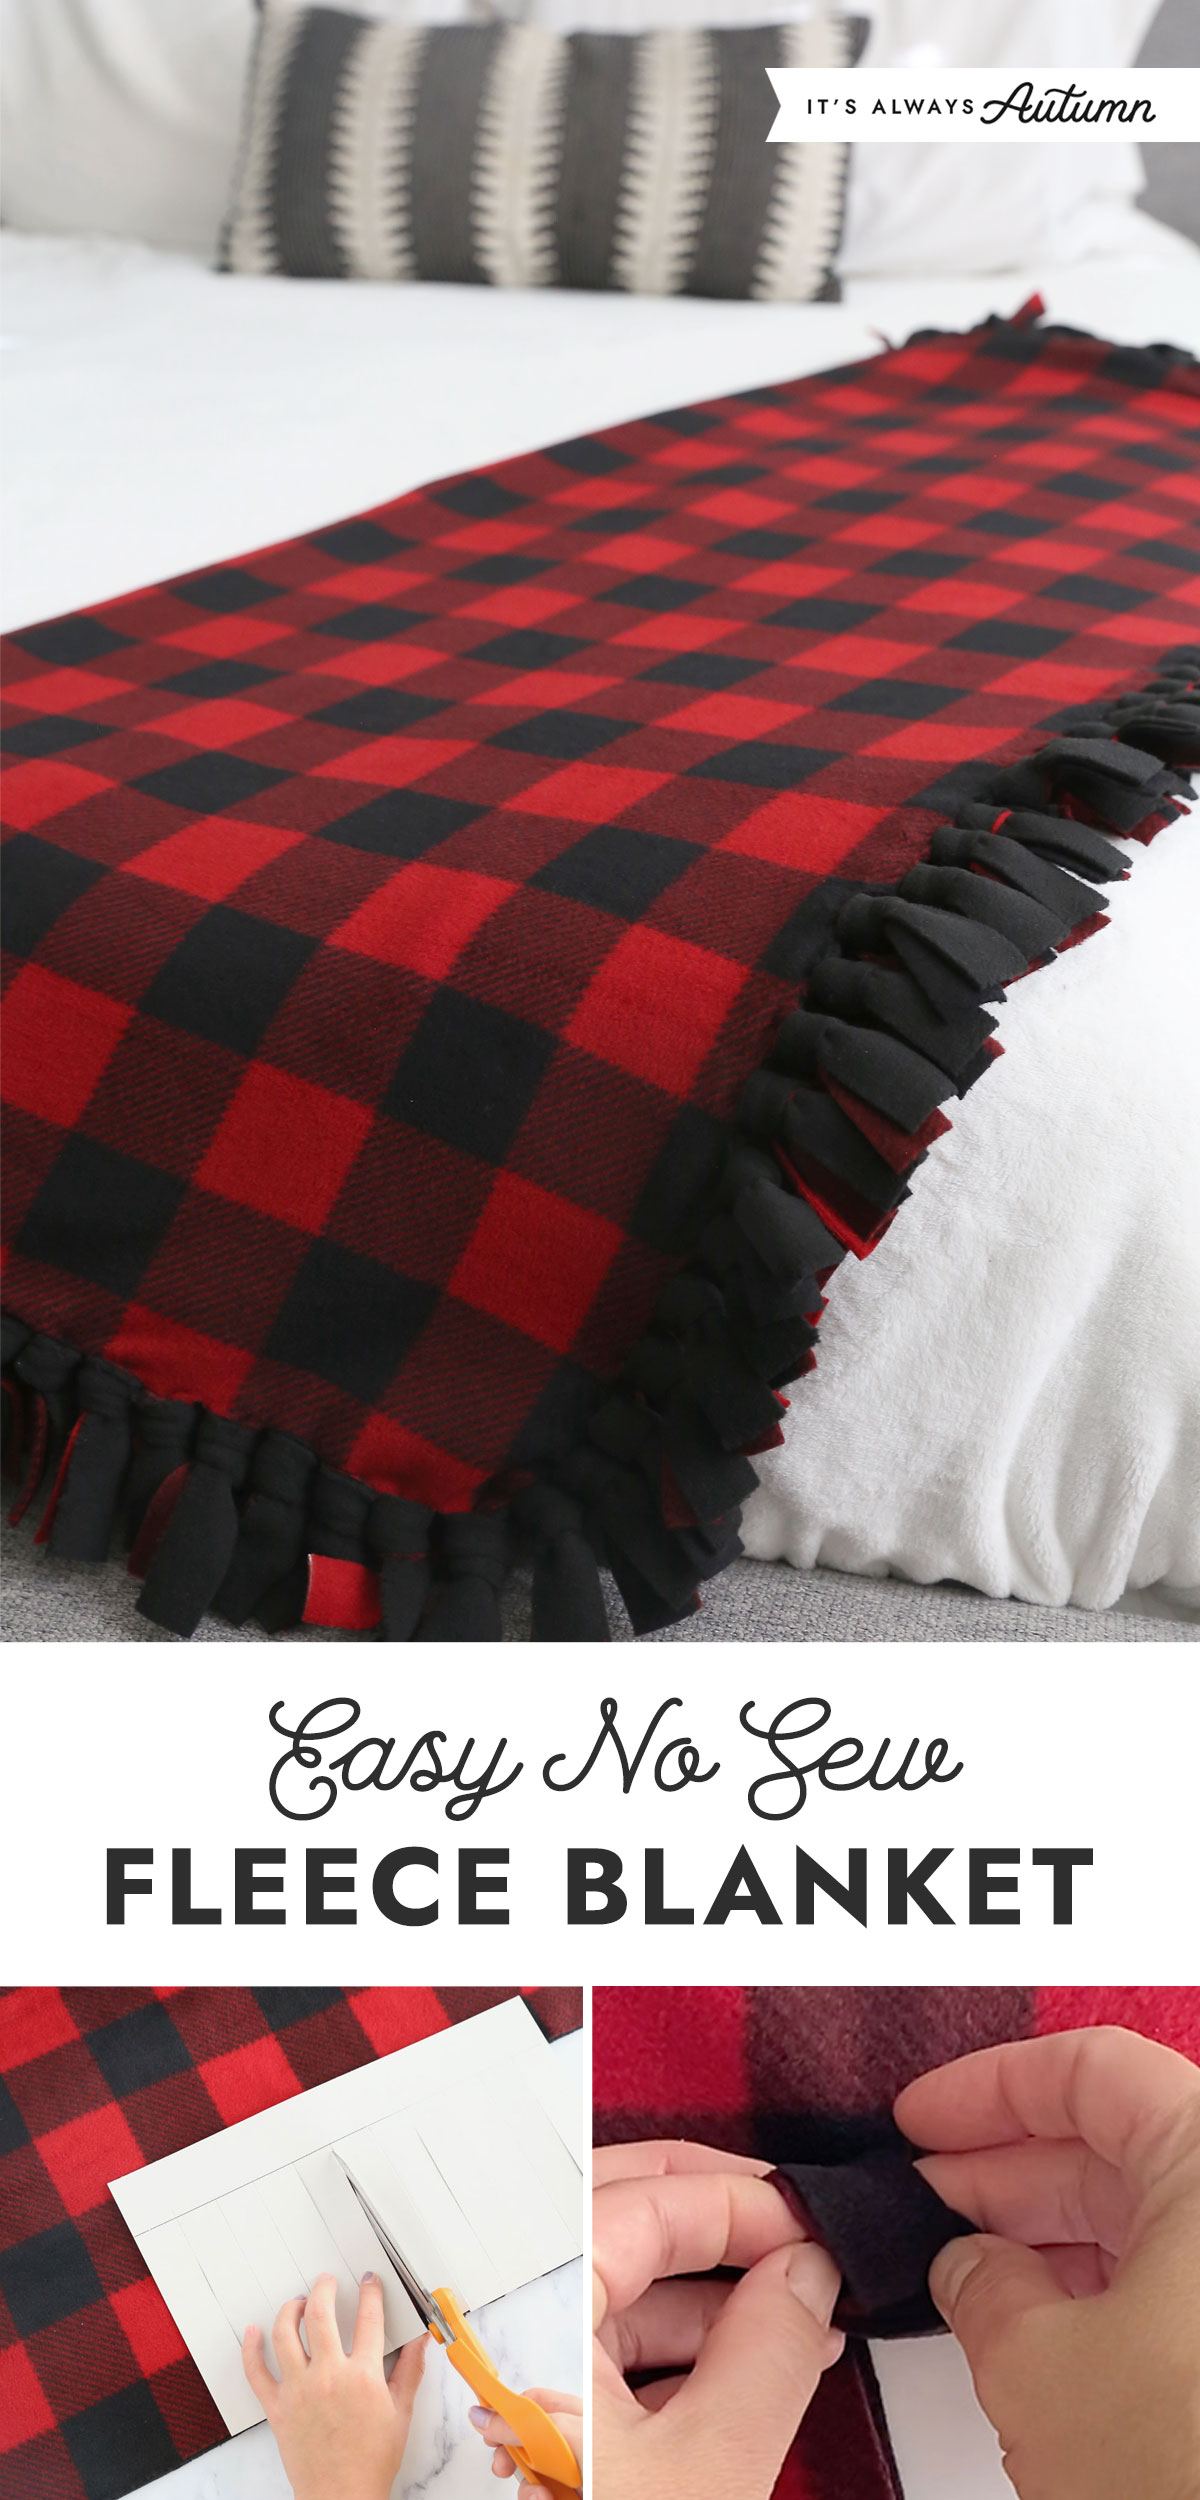 No Sew Fleece Blanket Instructions {The EASY Way!} - The Frugal Girls